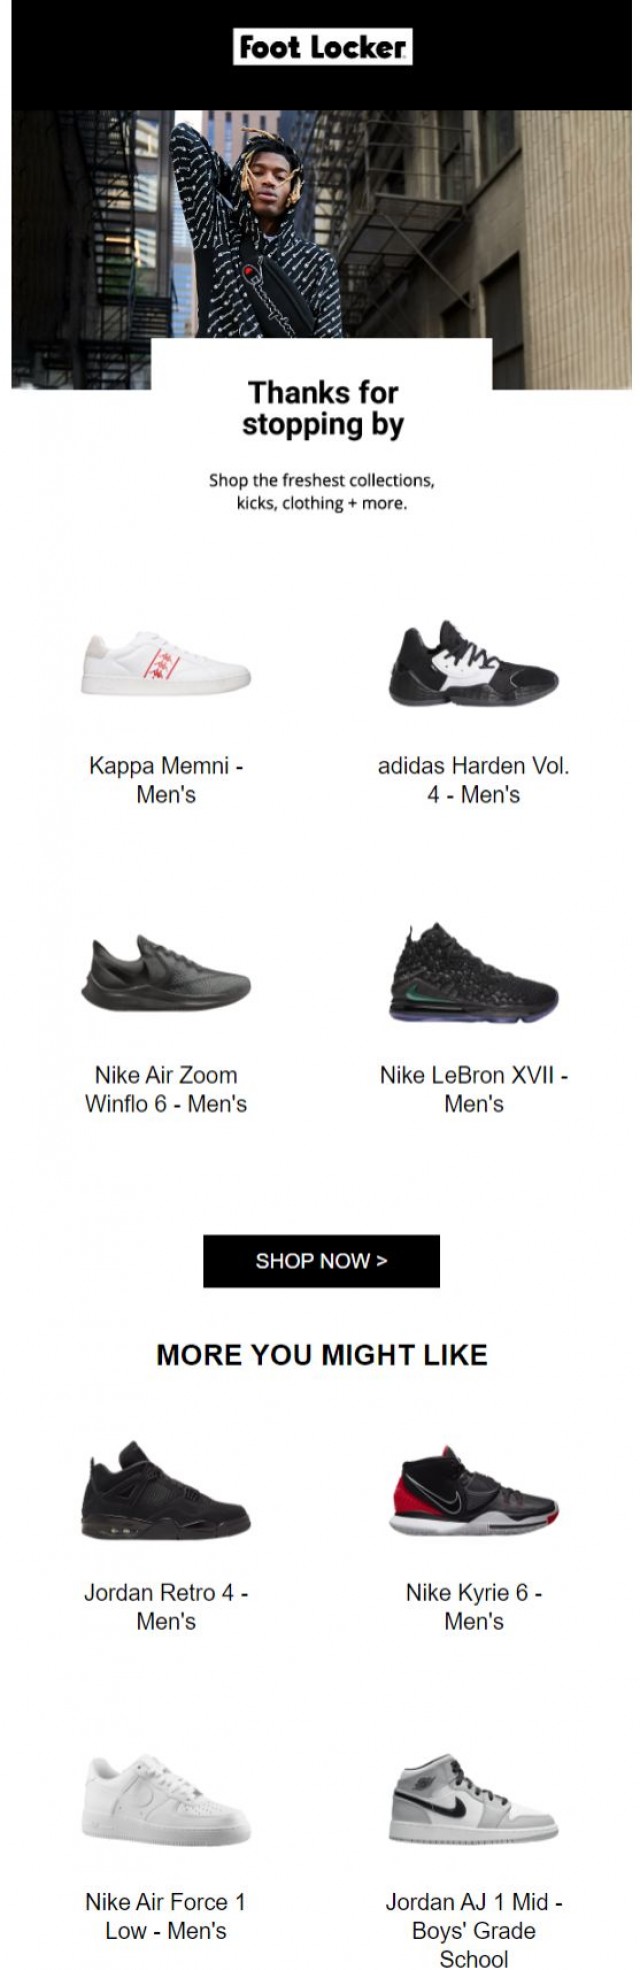 Coupon for: Foot Locker Canada - Thanks for checking us out!